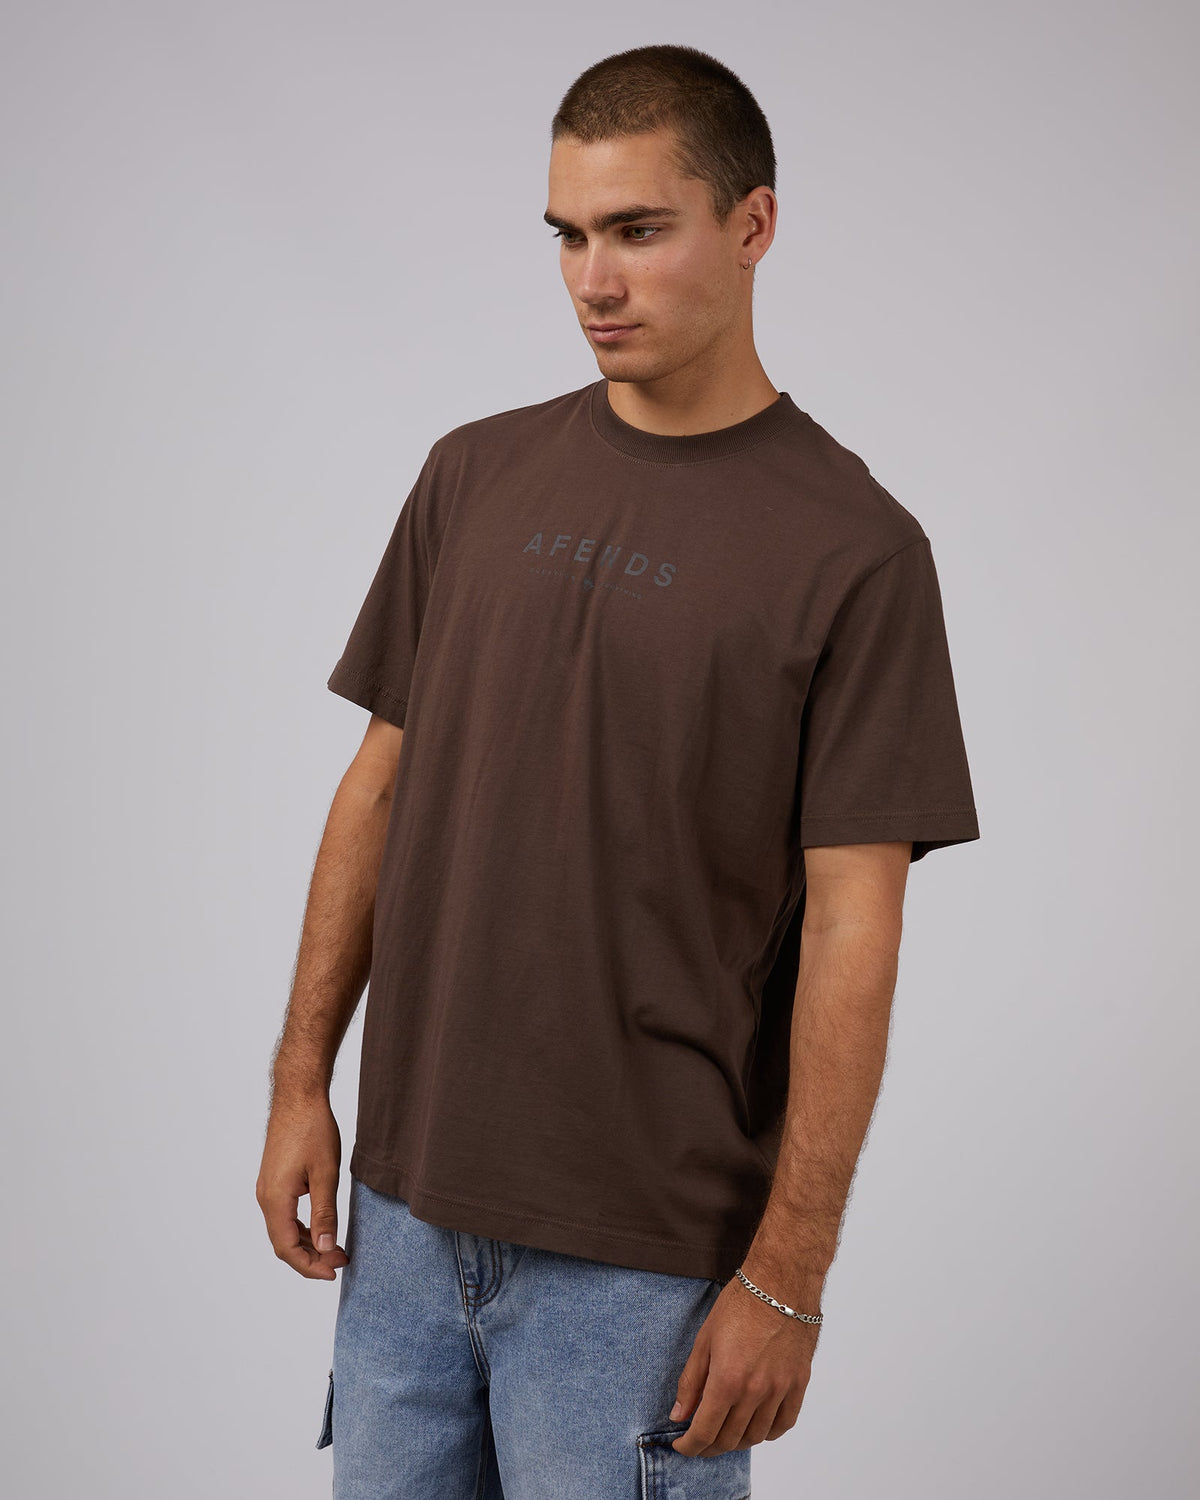 Afends-Thrown Out Retro Fit Tee Earth-Edge Clothing